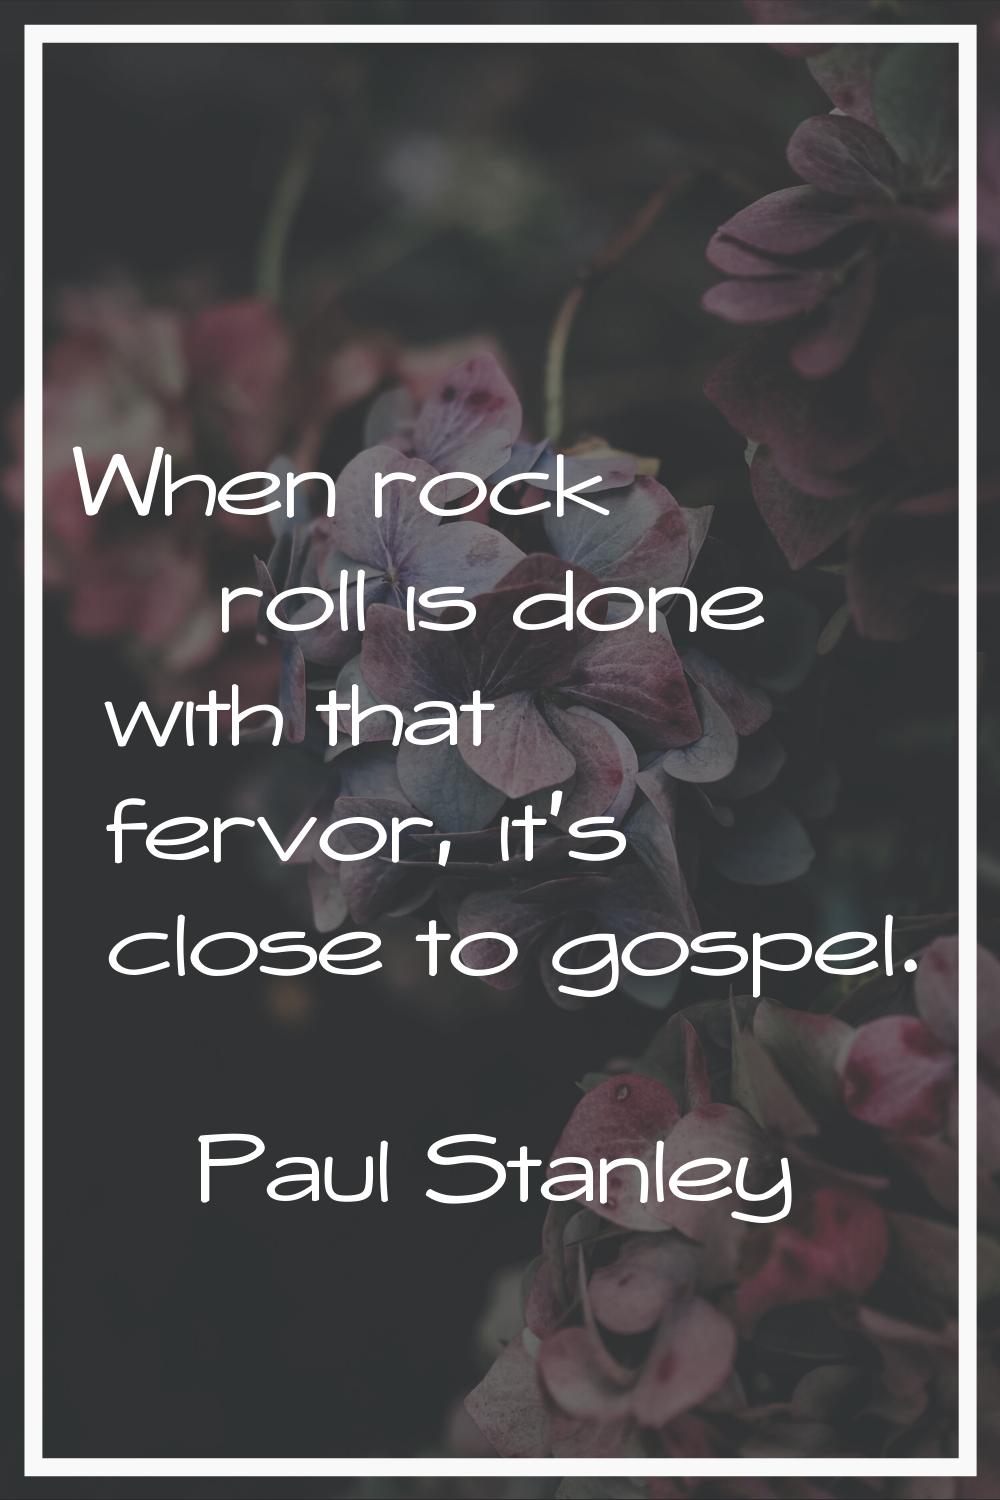 When rock & roll is done with that fervor, it's close to gospel.